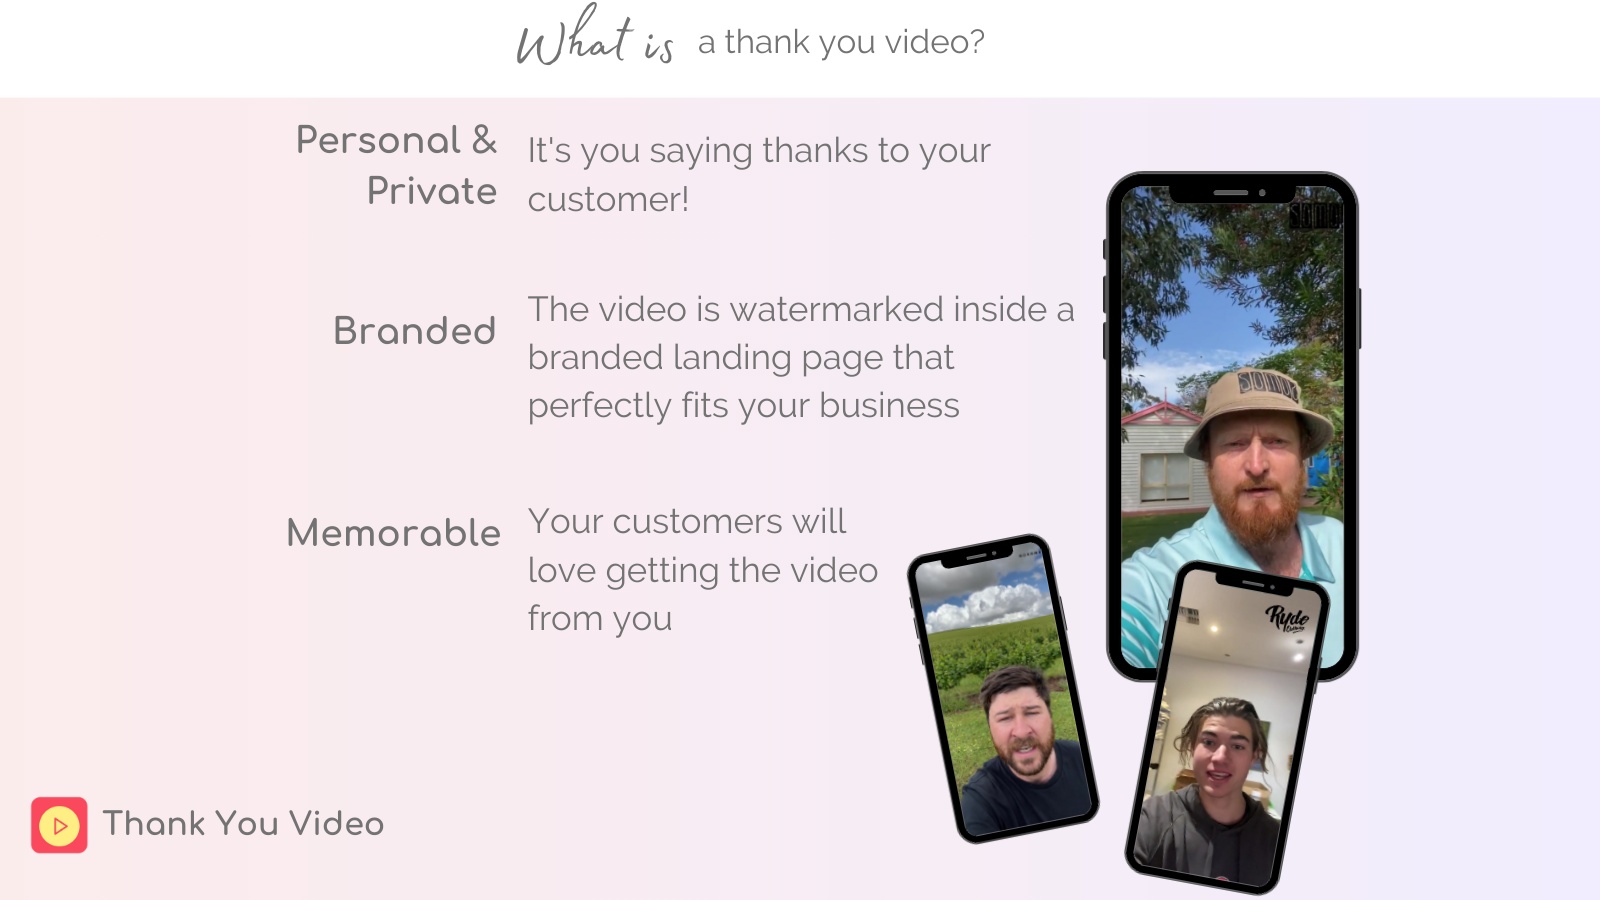 What is a thank you video?